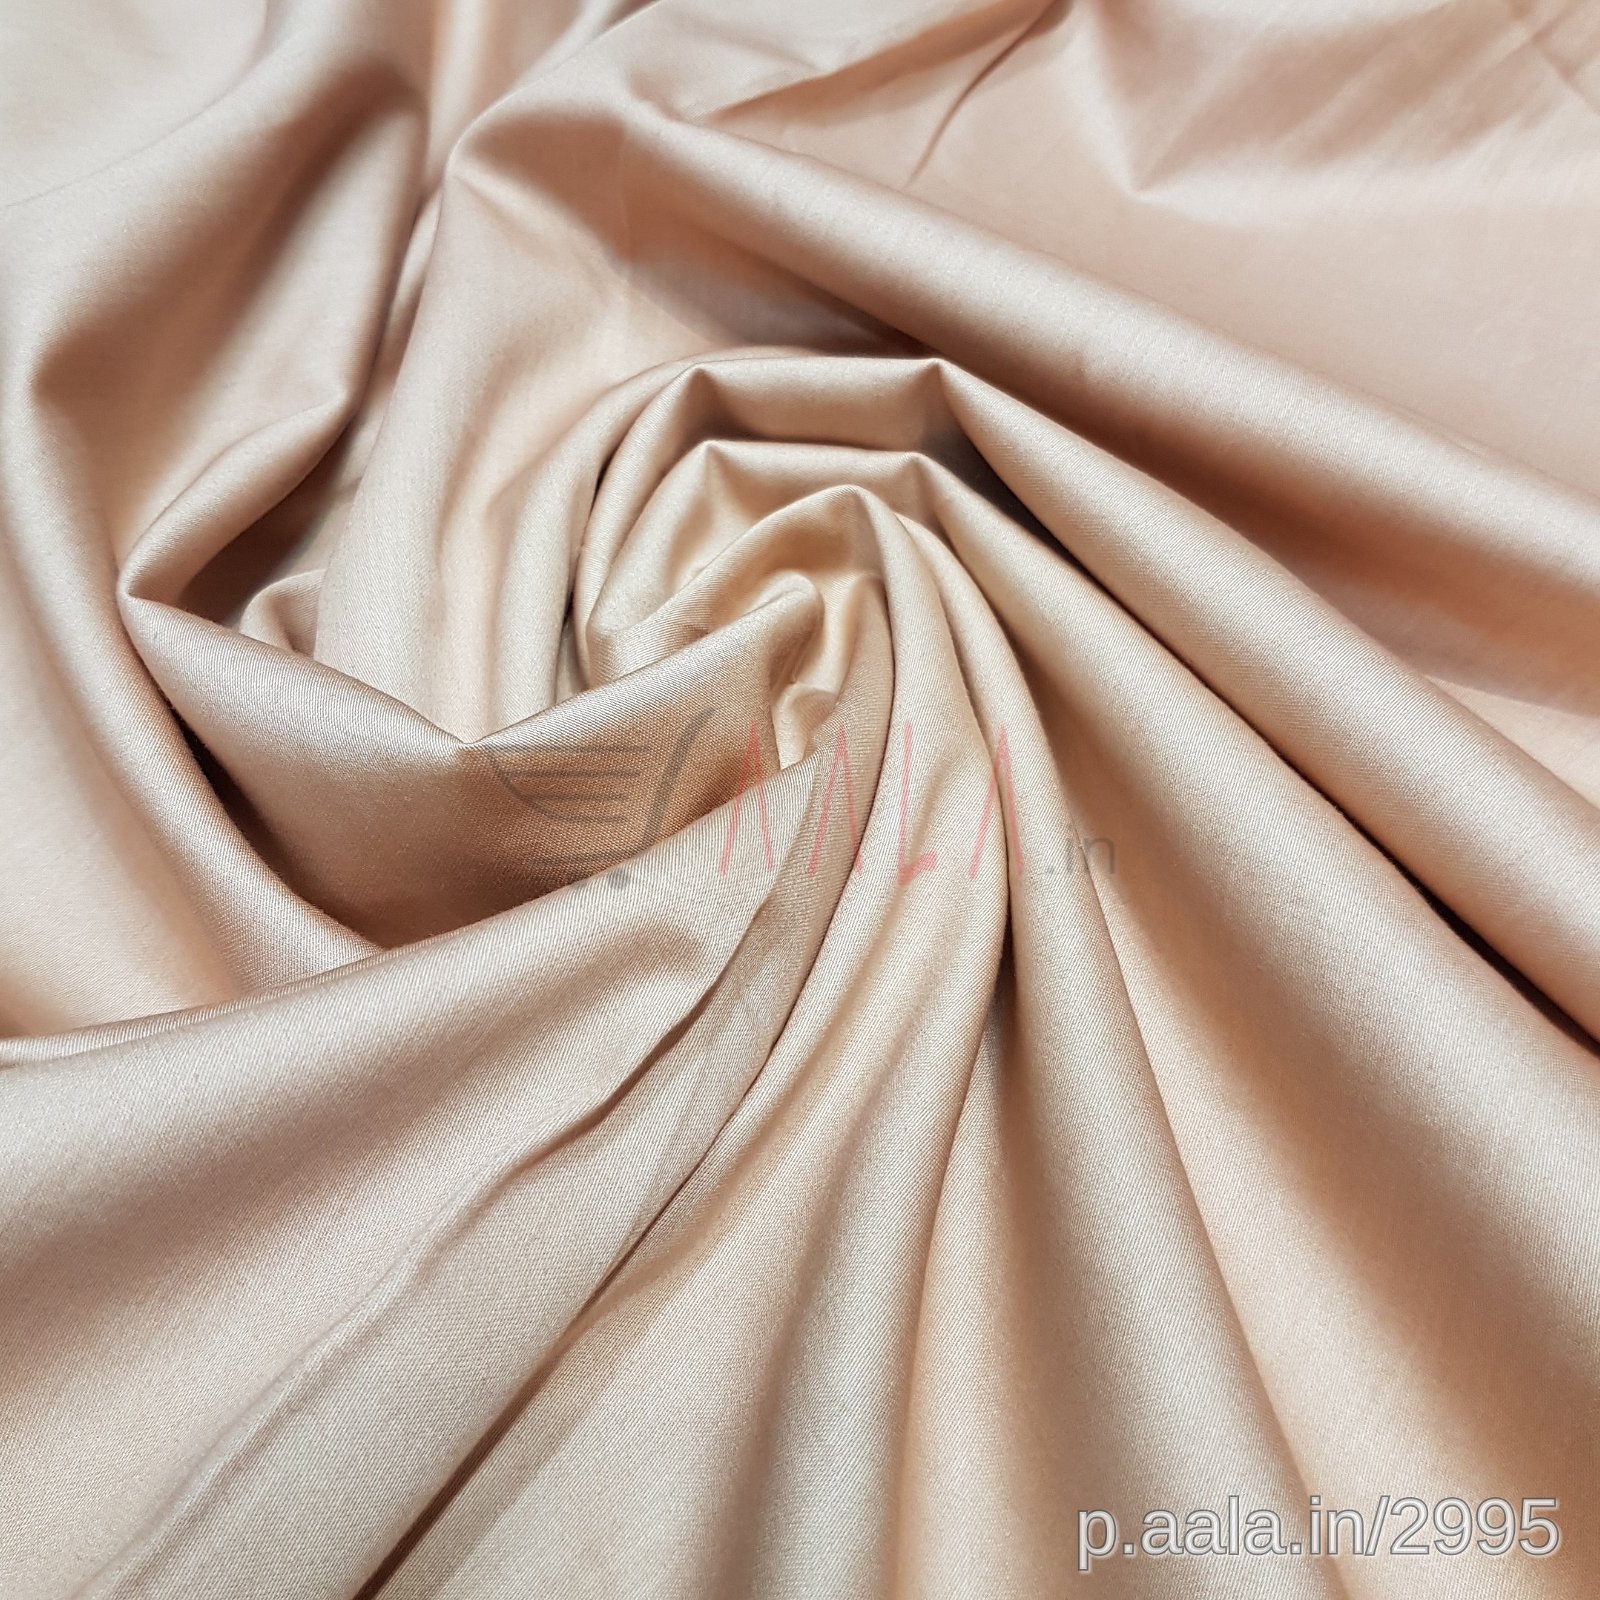 Satin Cotton 44 Inches Dyed Per Metre #2995